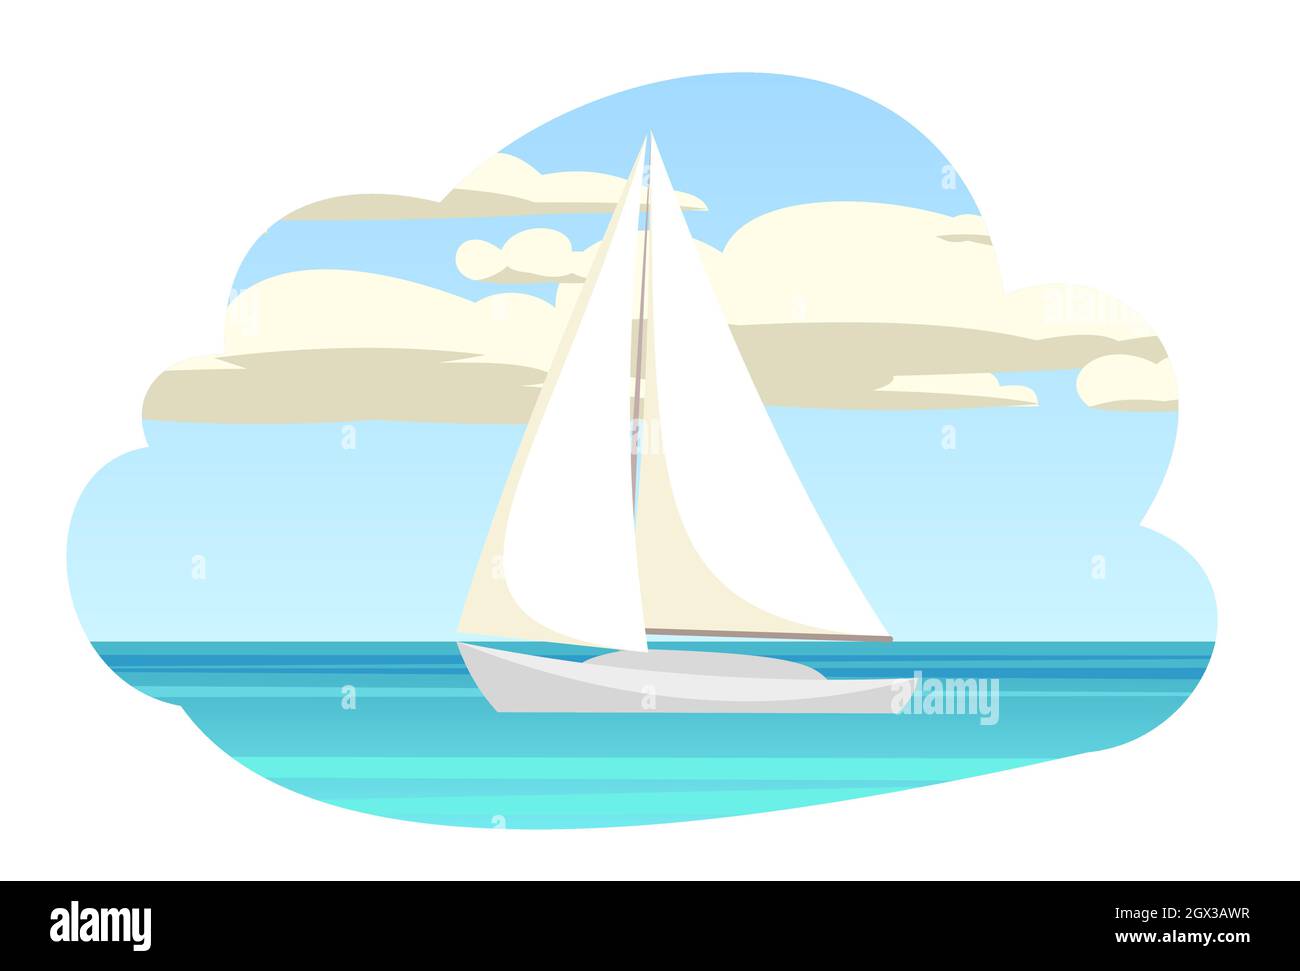 Sailing yacht. White single masted vessel with classic hull lines. View from afar. Composition in form of cloud. Isolated on white background. Calm Stock Vector